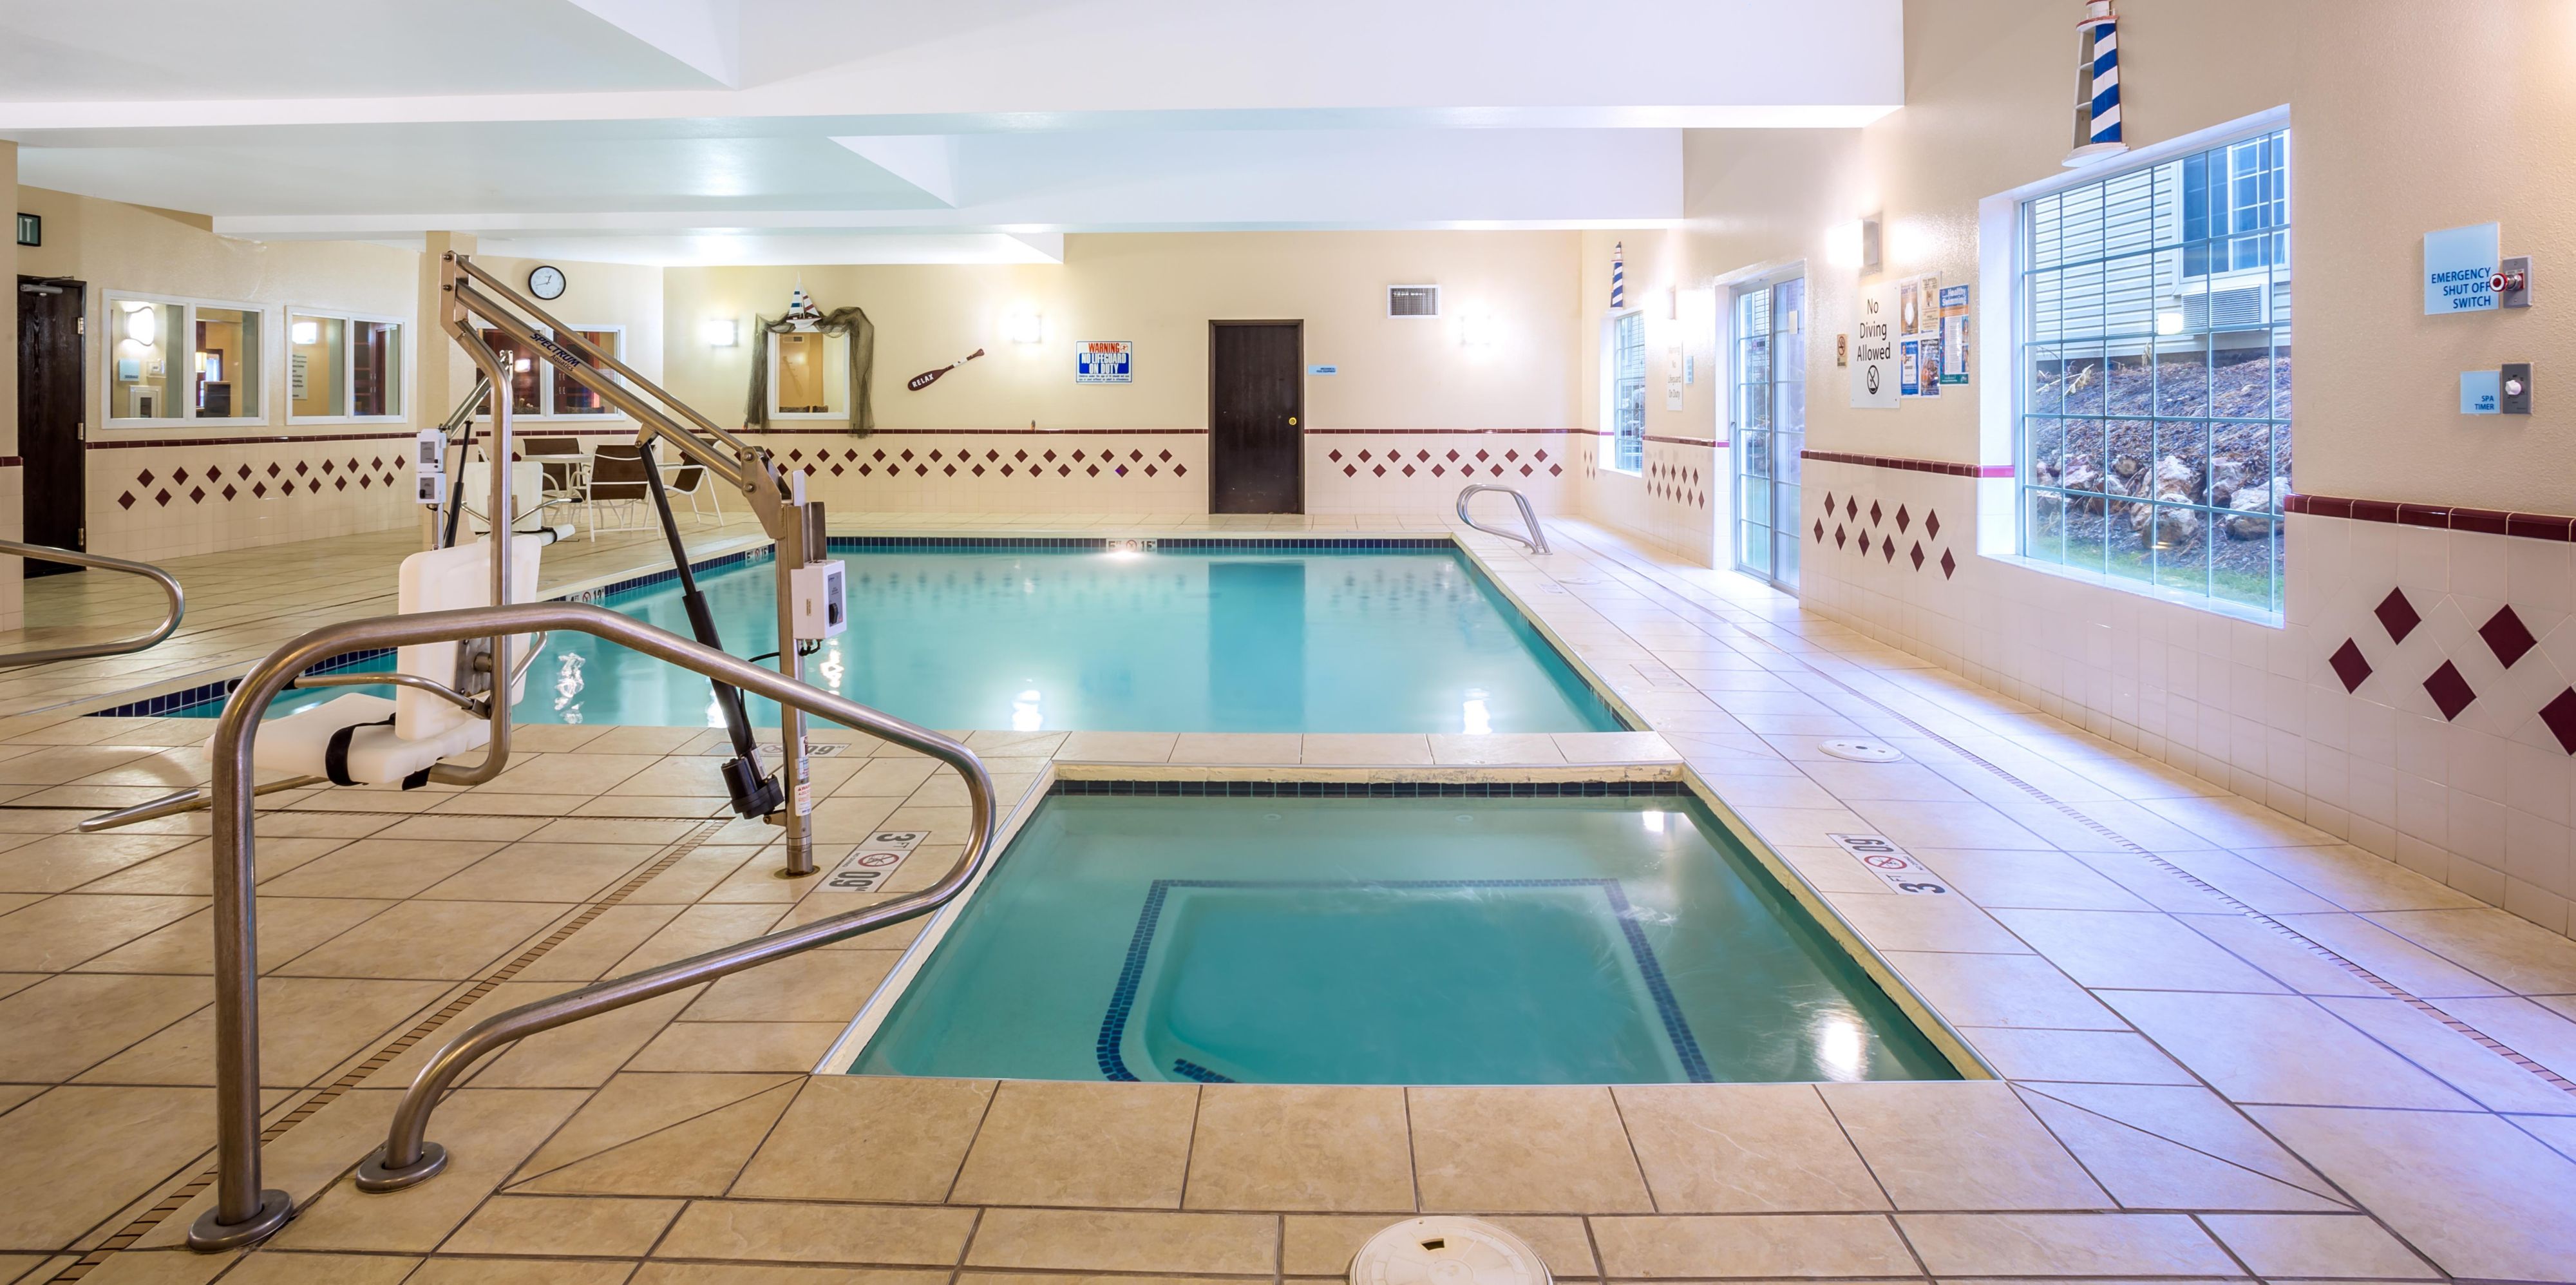 In town with the kids? They will Love our indoor heated pool and spa. Open daily from 6am-11pm.